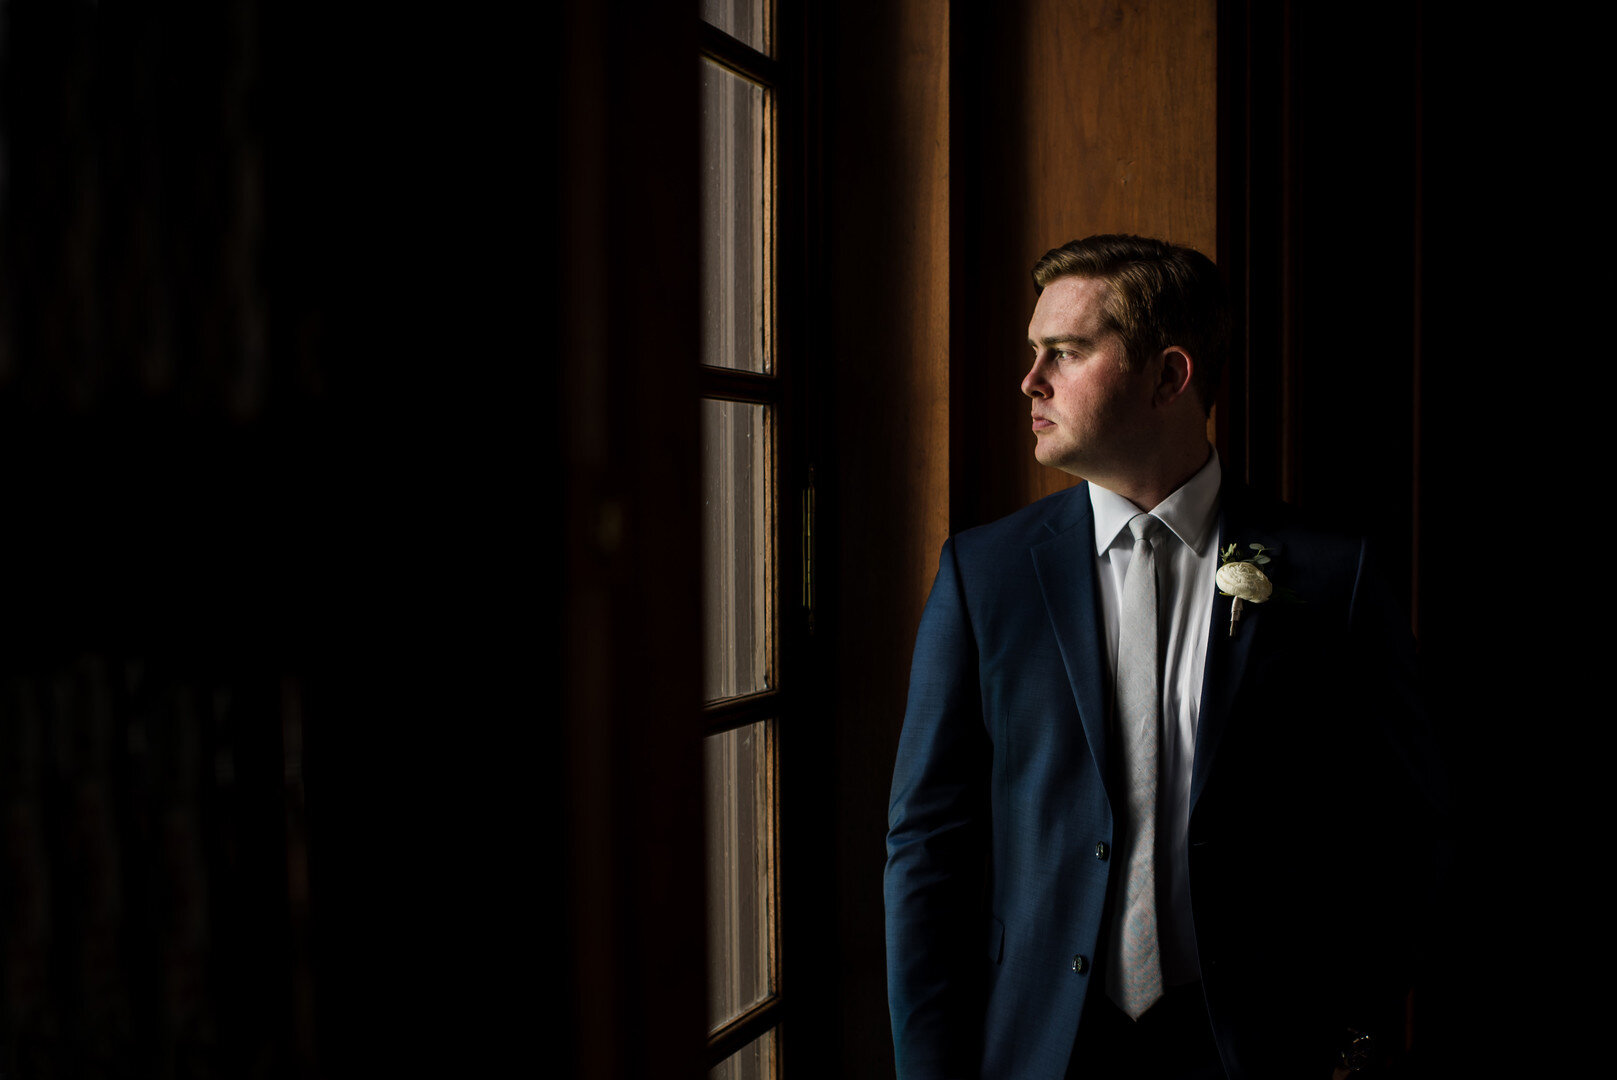 Grooms portrait: Golden Hour Armour House Chicago Wedding captured by Inspired Eye Photography featured on CHI thee WED. Find more wedding ideas at CHItheeWED.com!